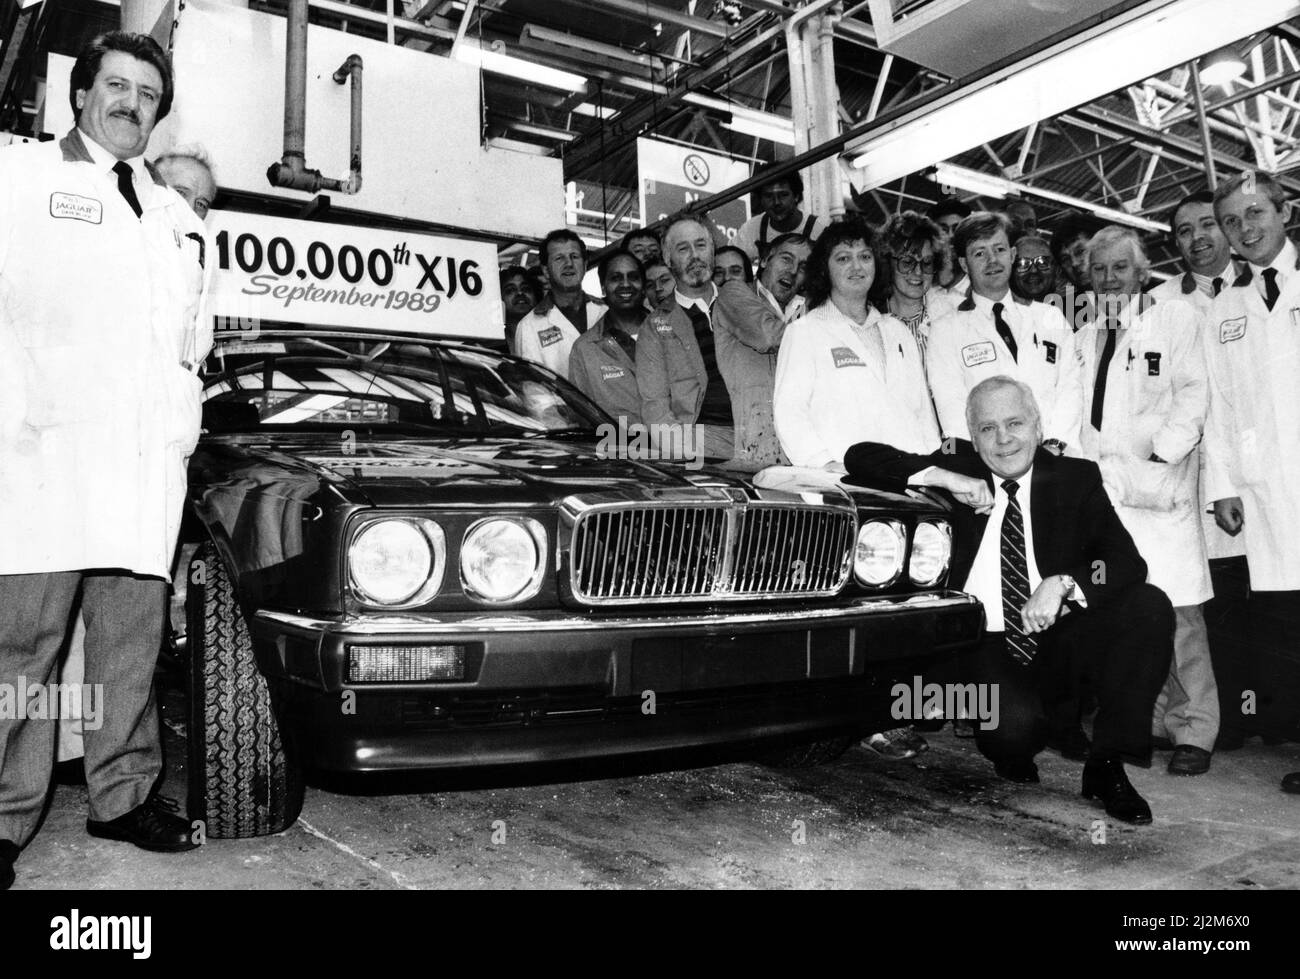 Jaguar Chairman and Chief Executive Sir John Egan at the front of the 100,000th XJ6 off the production line, surrounded by assembly worker. 11th September 1989. Stock Photo